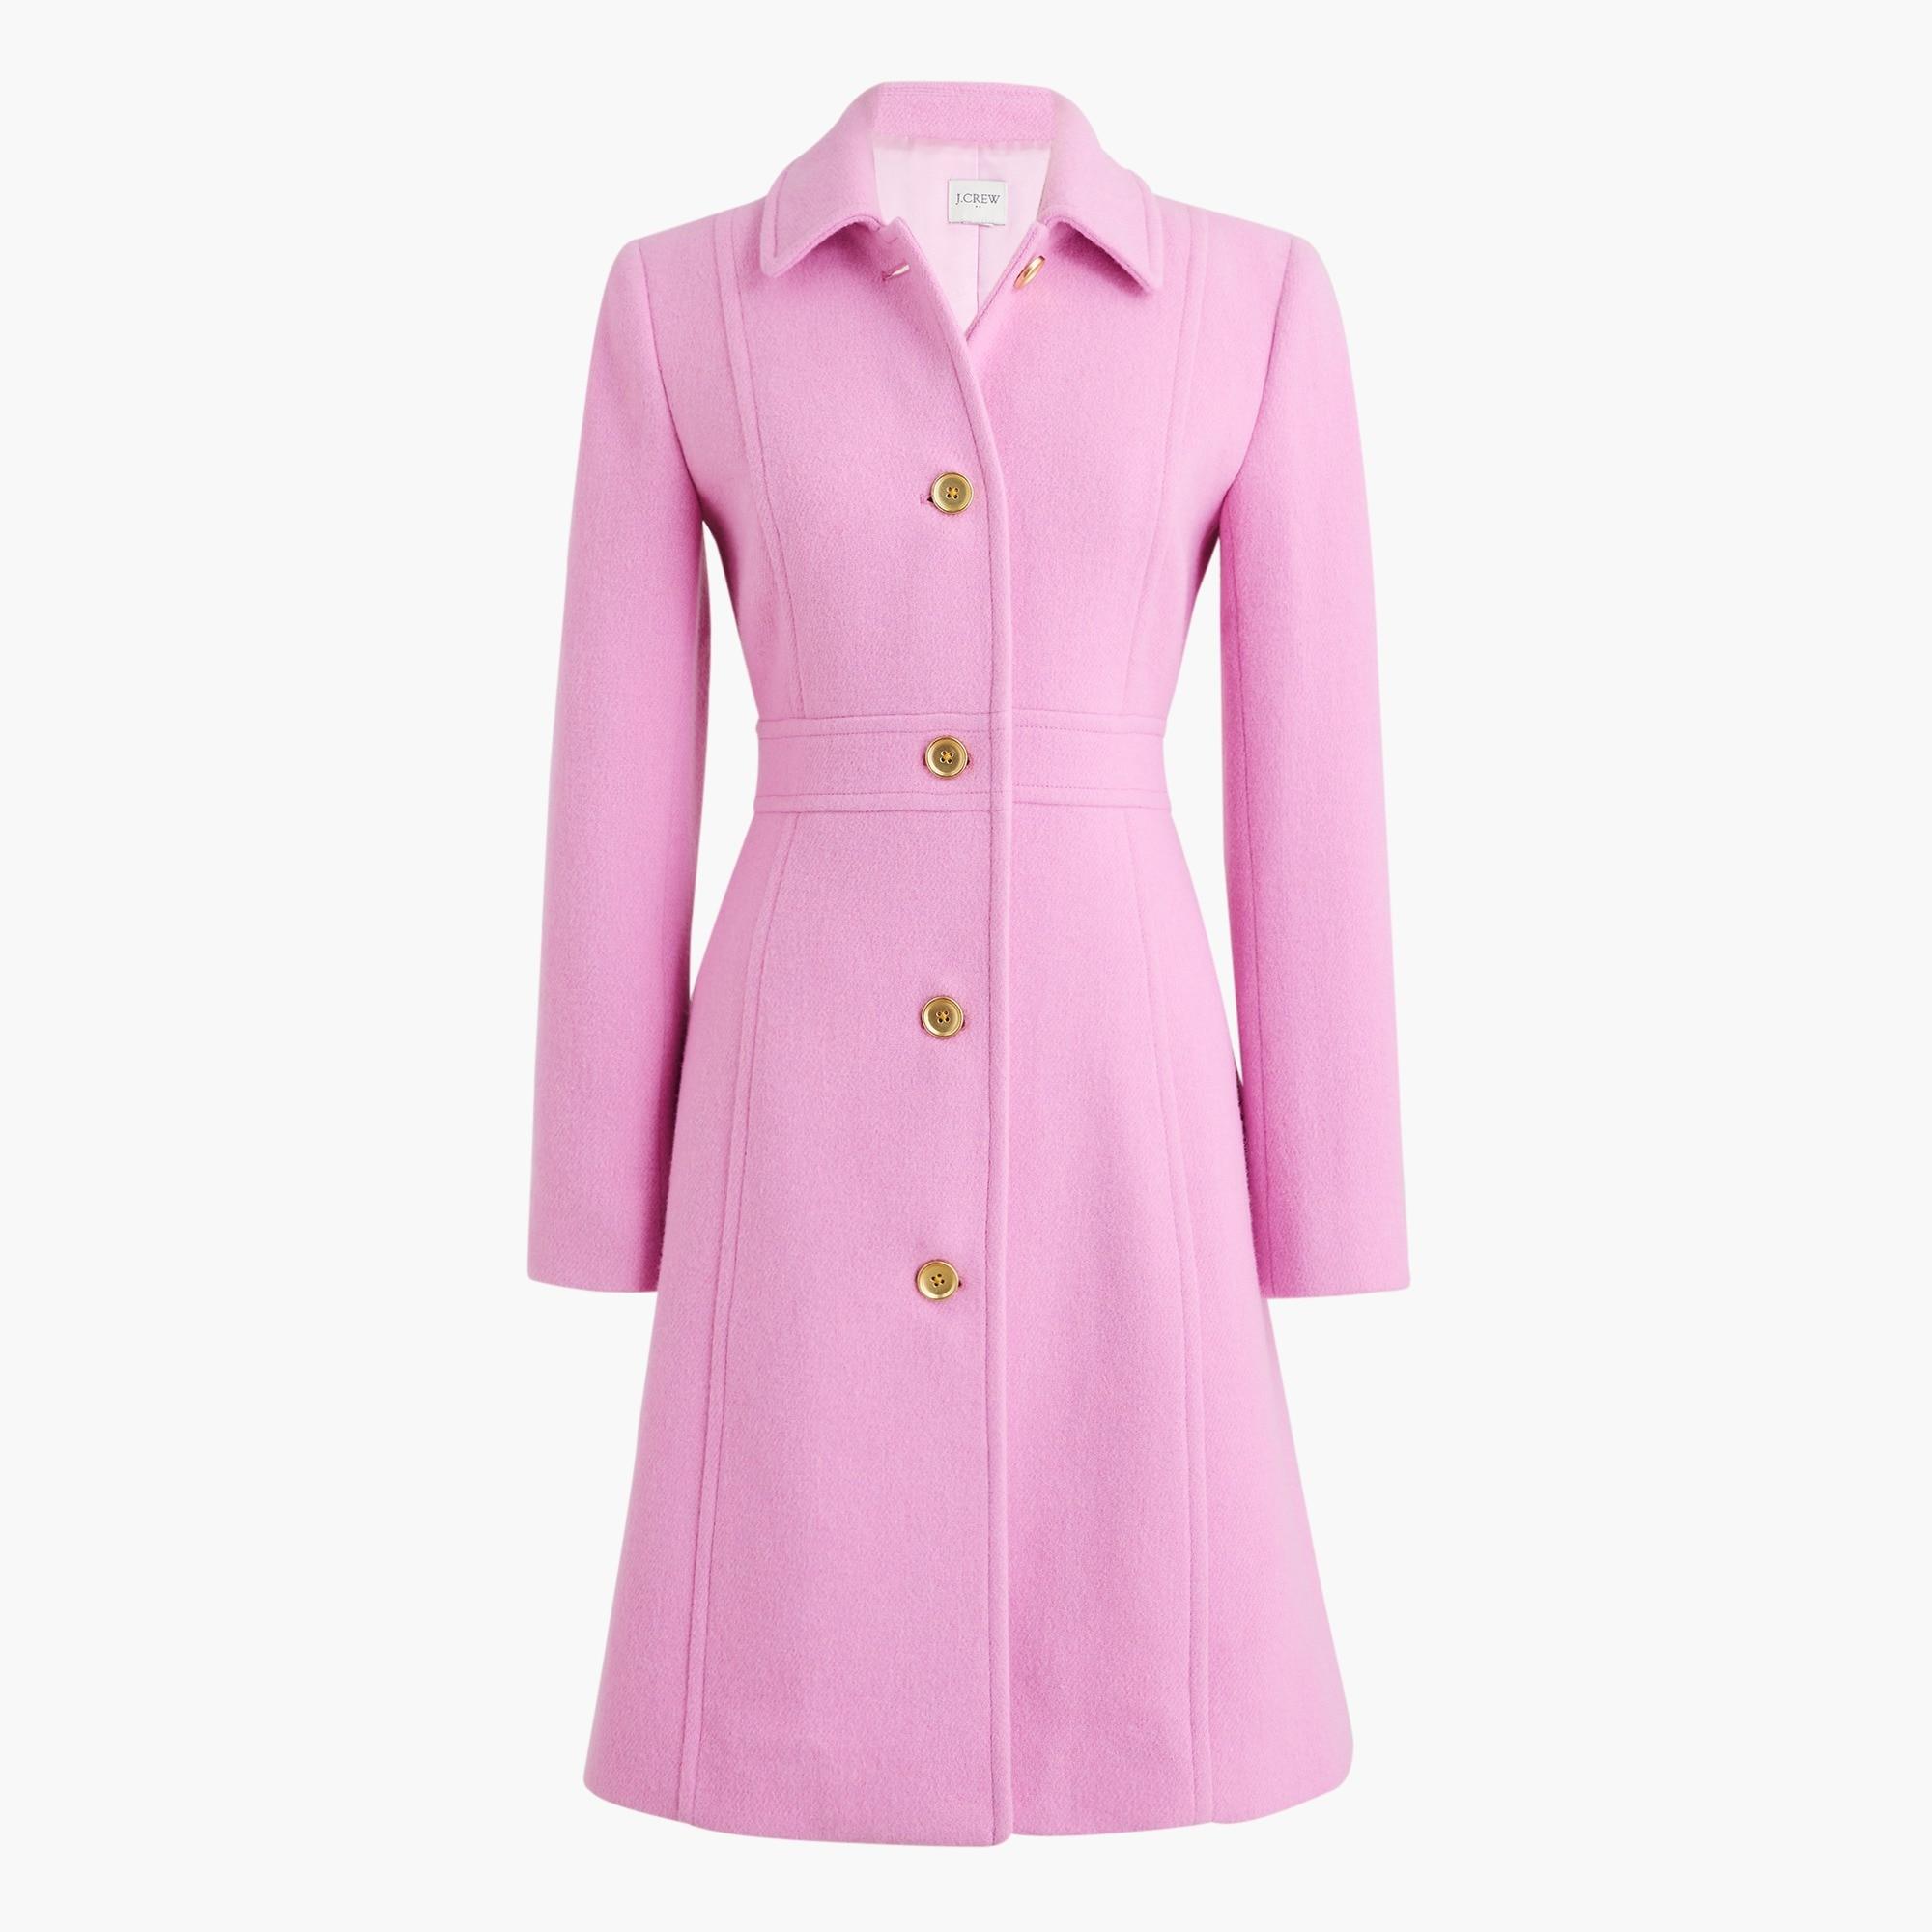 J.Crew: Double-breasted Topcoat In Italian Wool-cashmere For Women